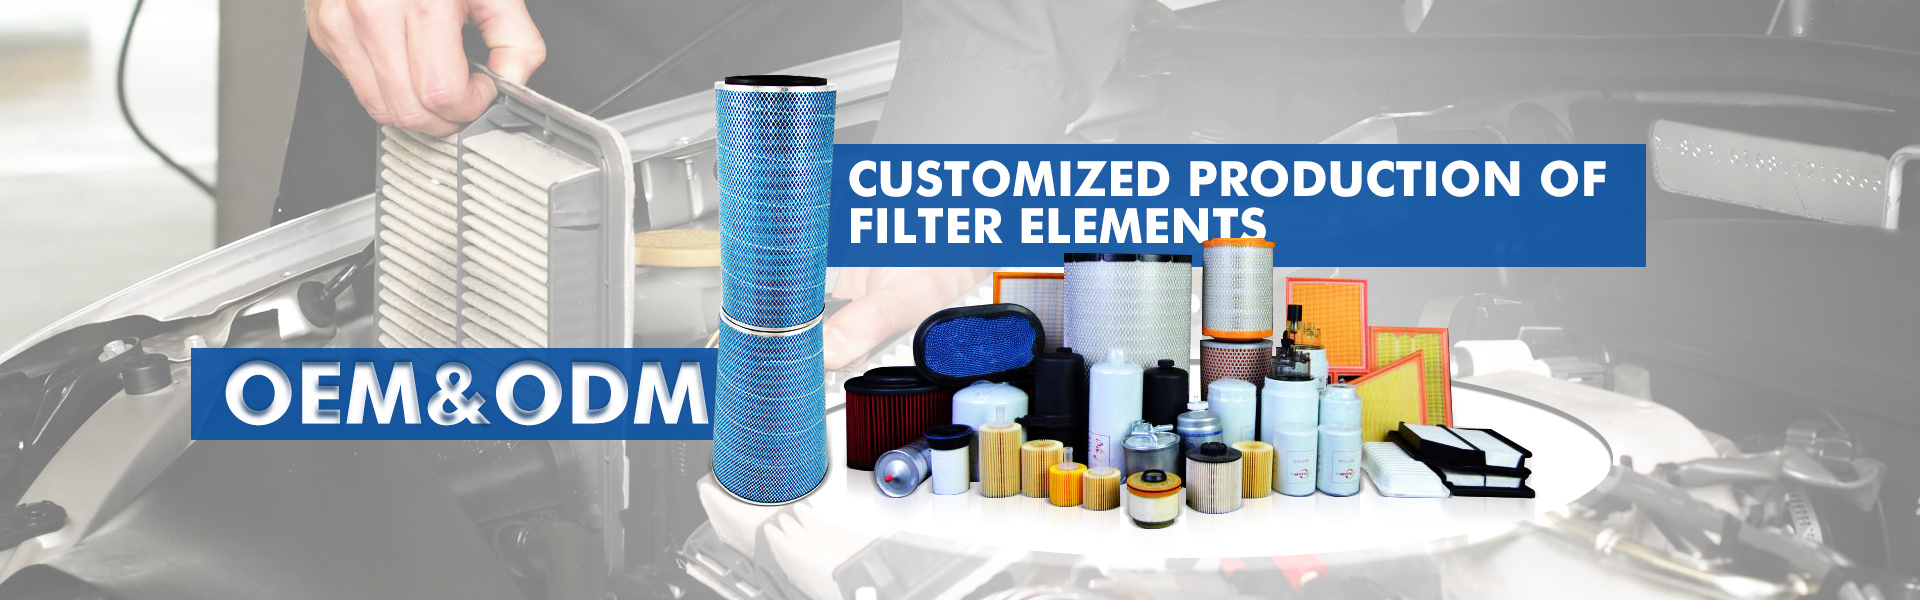 I-CABIN AIR FILTER PRODUCTION SOLUTION